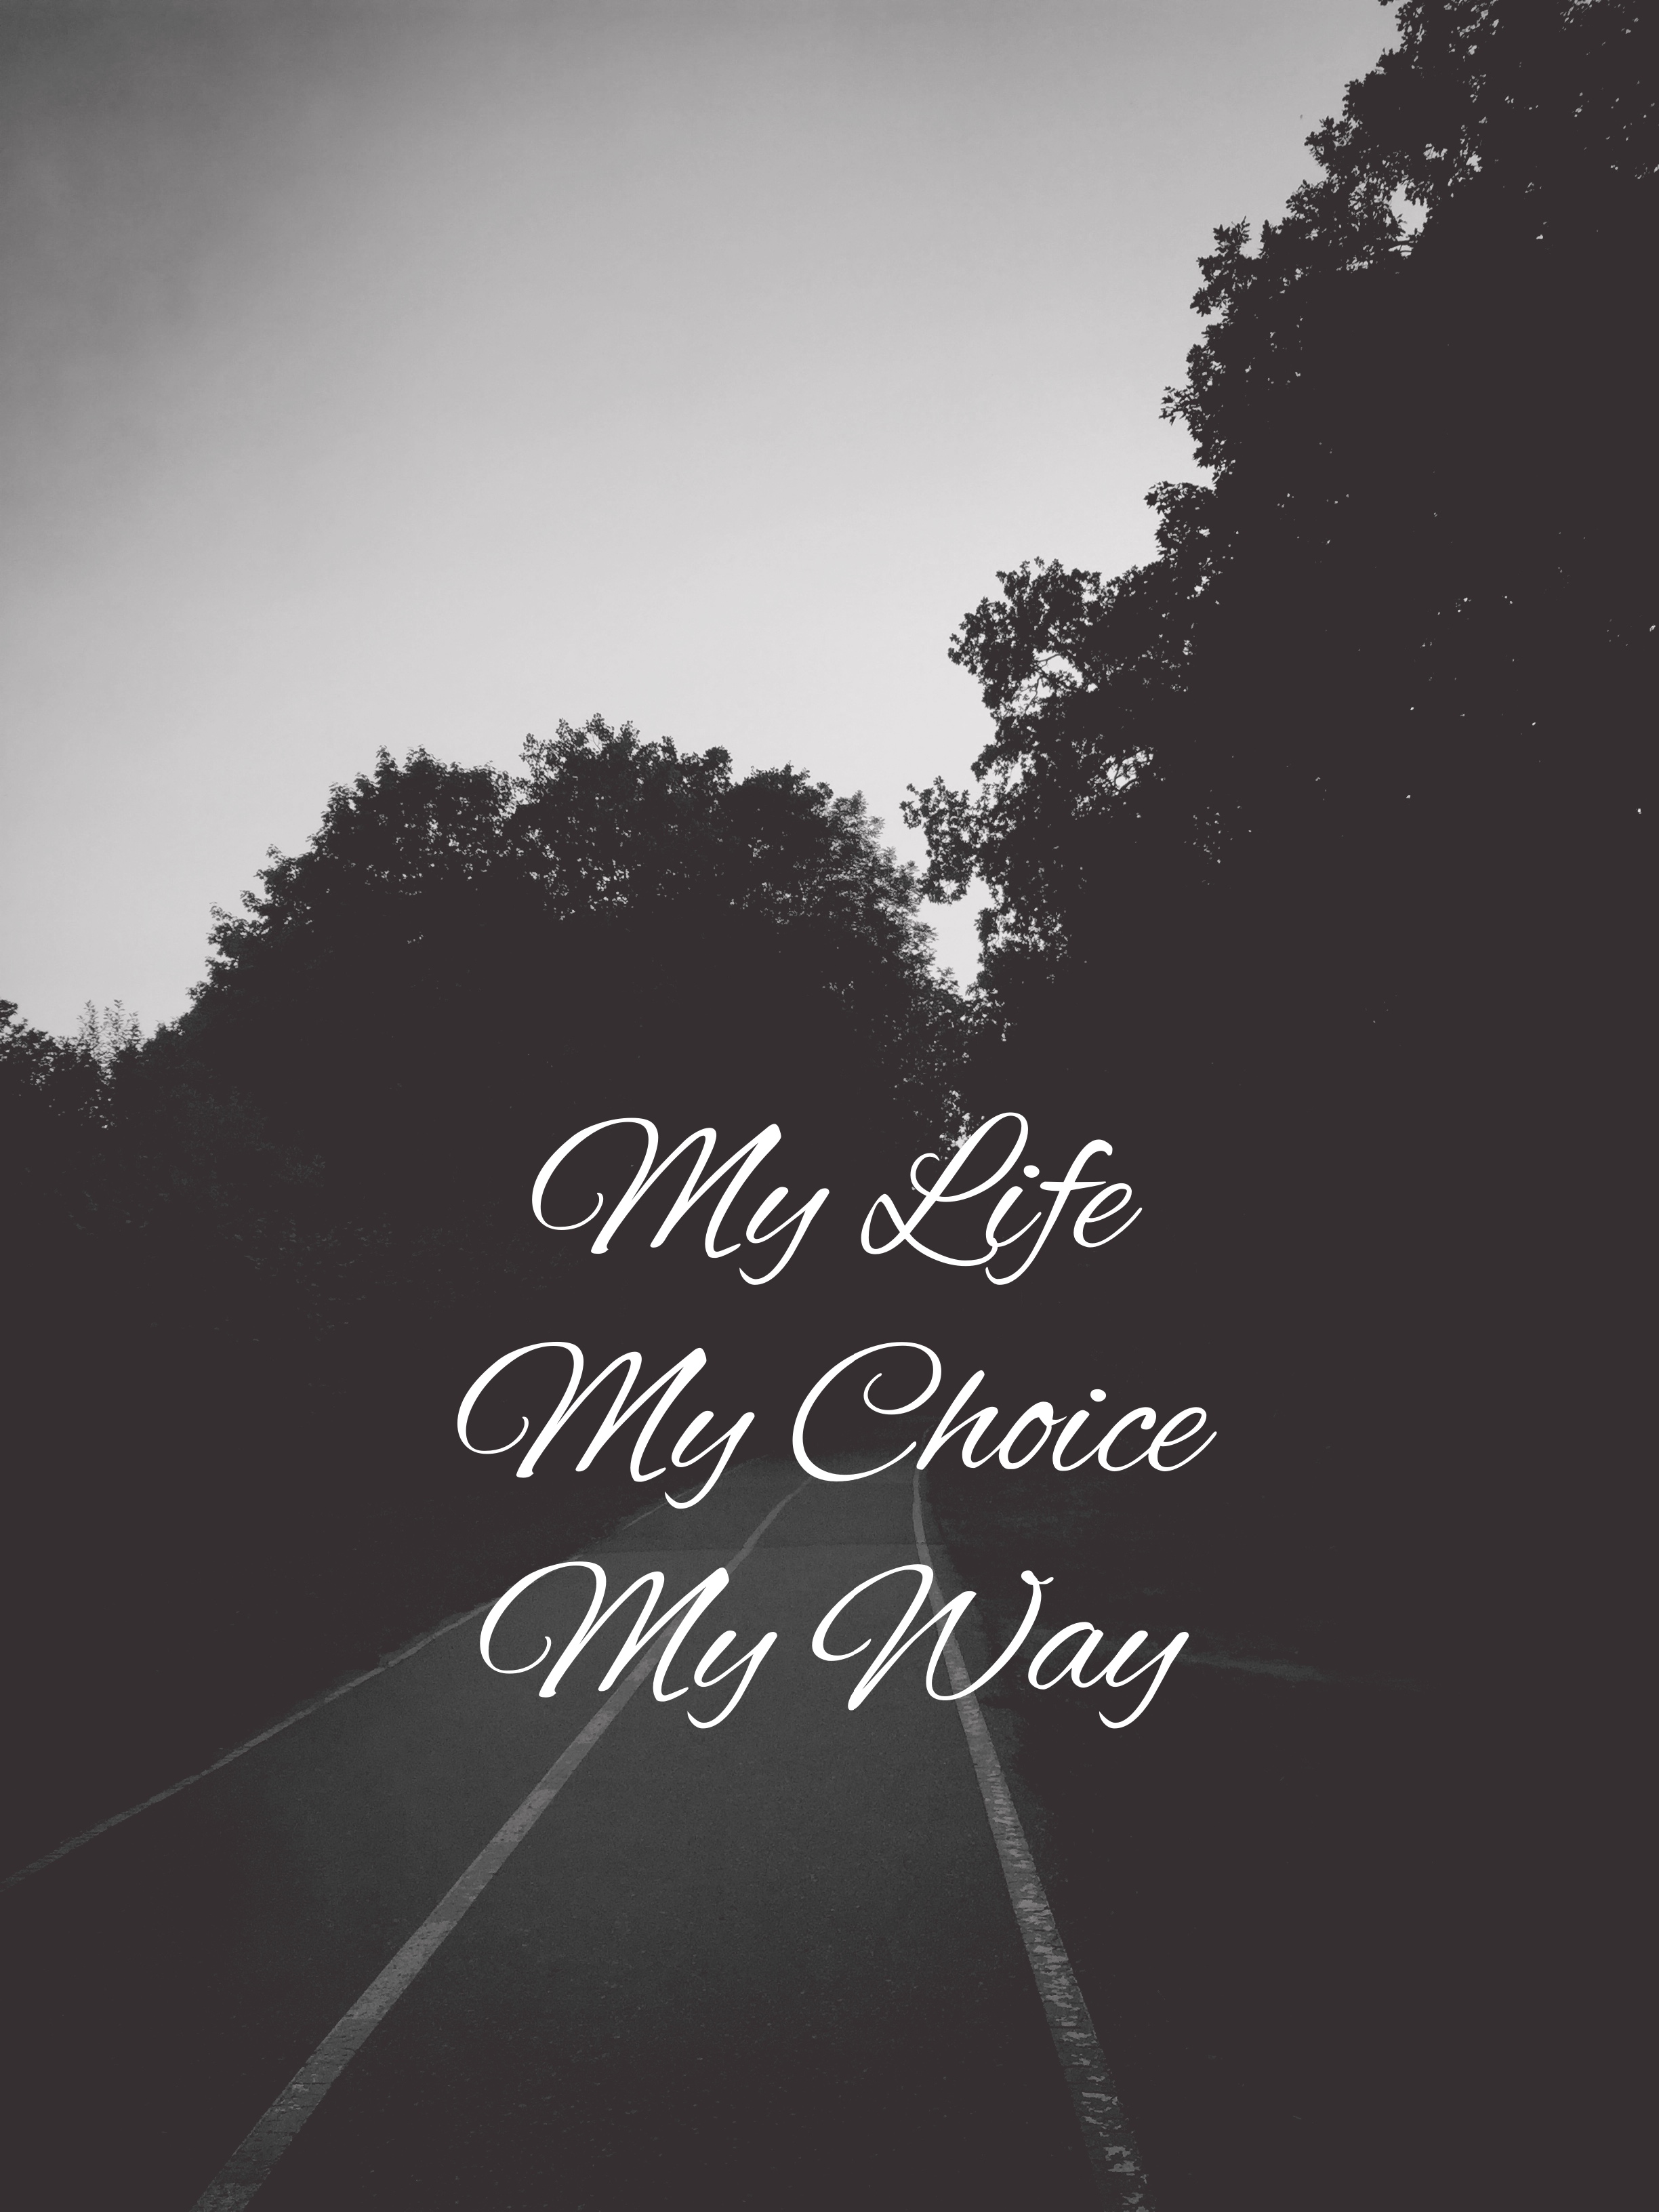 words, quotation, quote, bw, text, chb, inscription, road, path, way iphone wallpaper